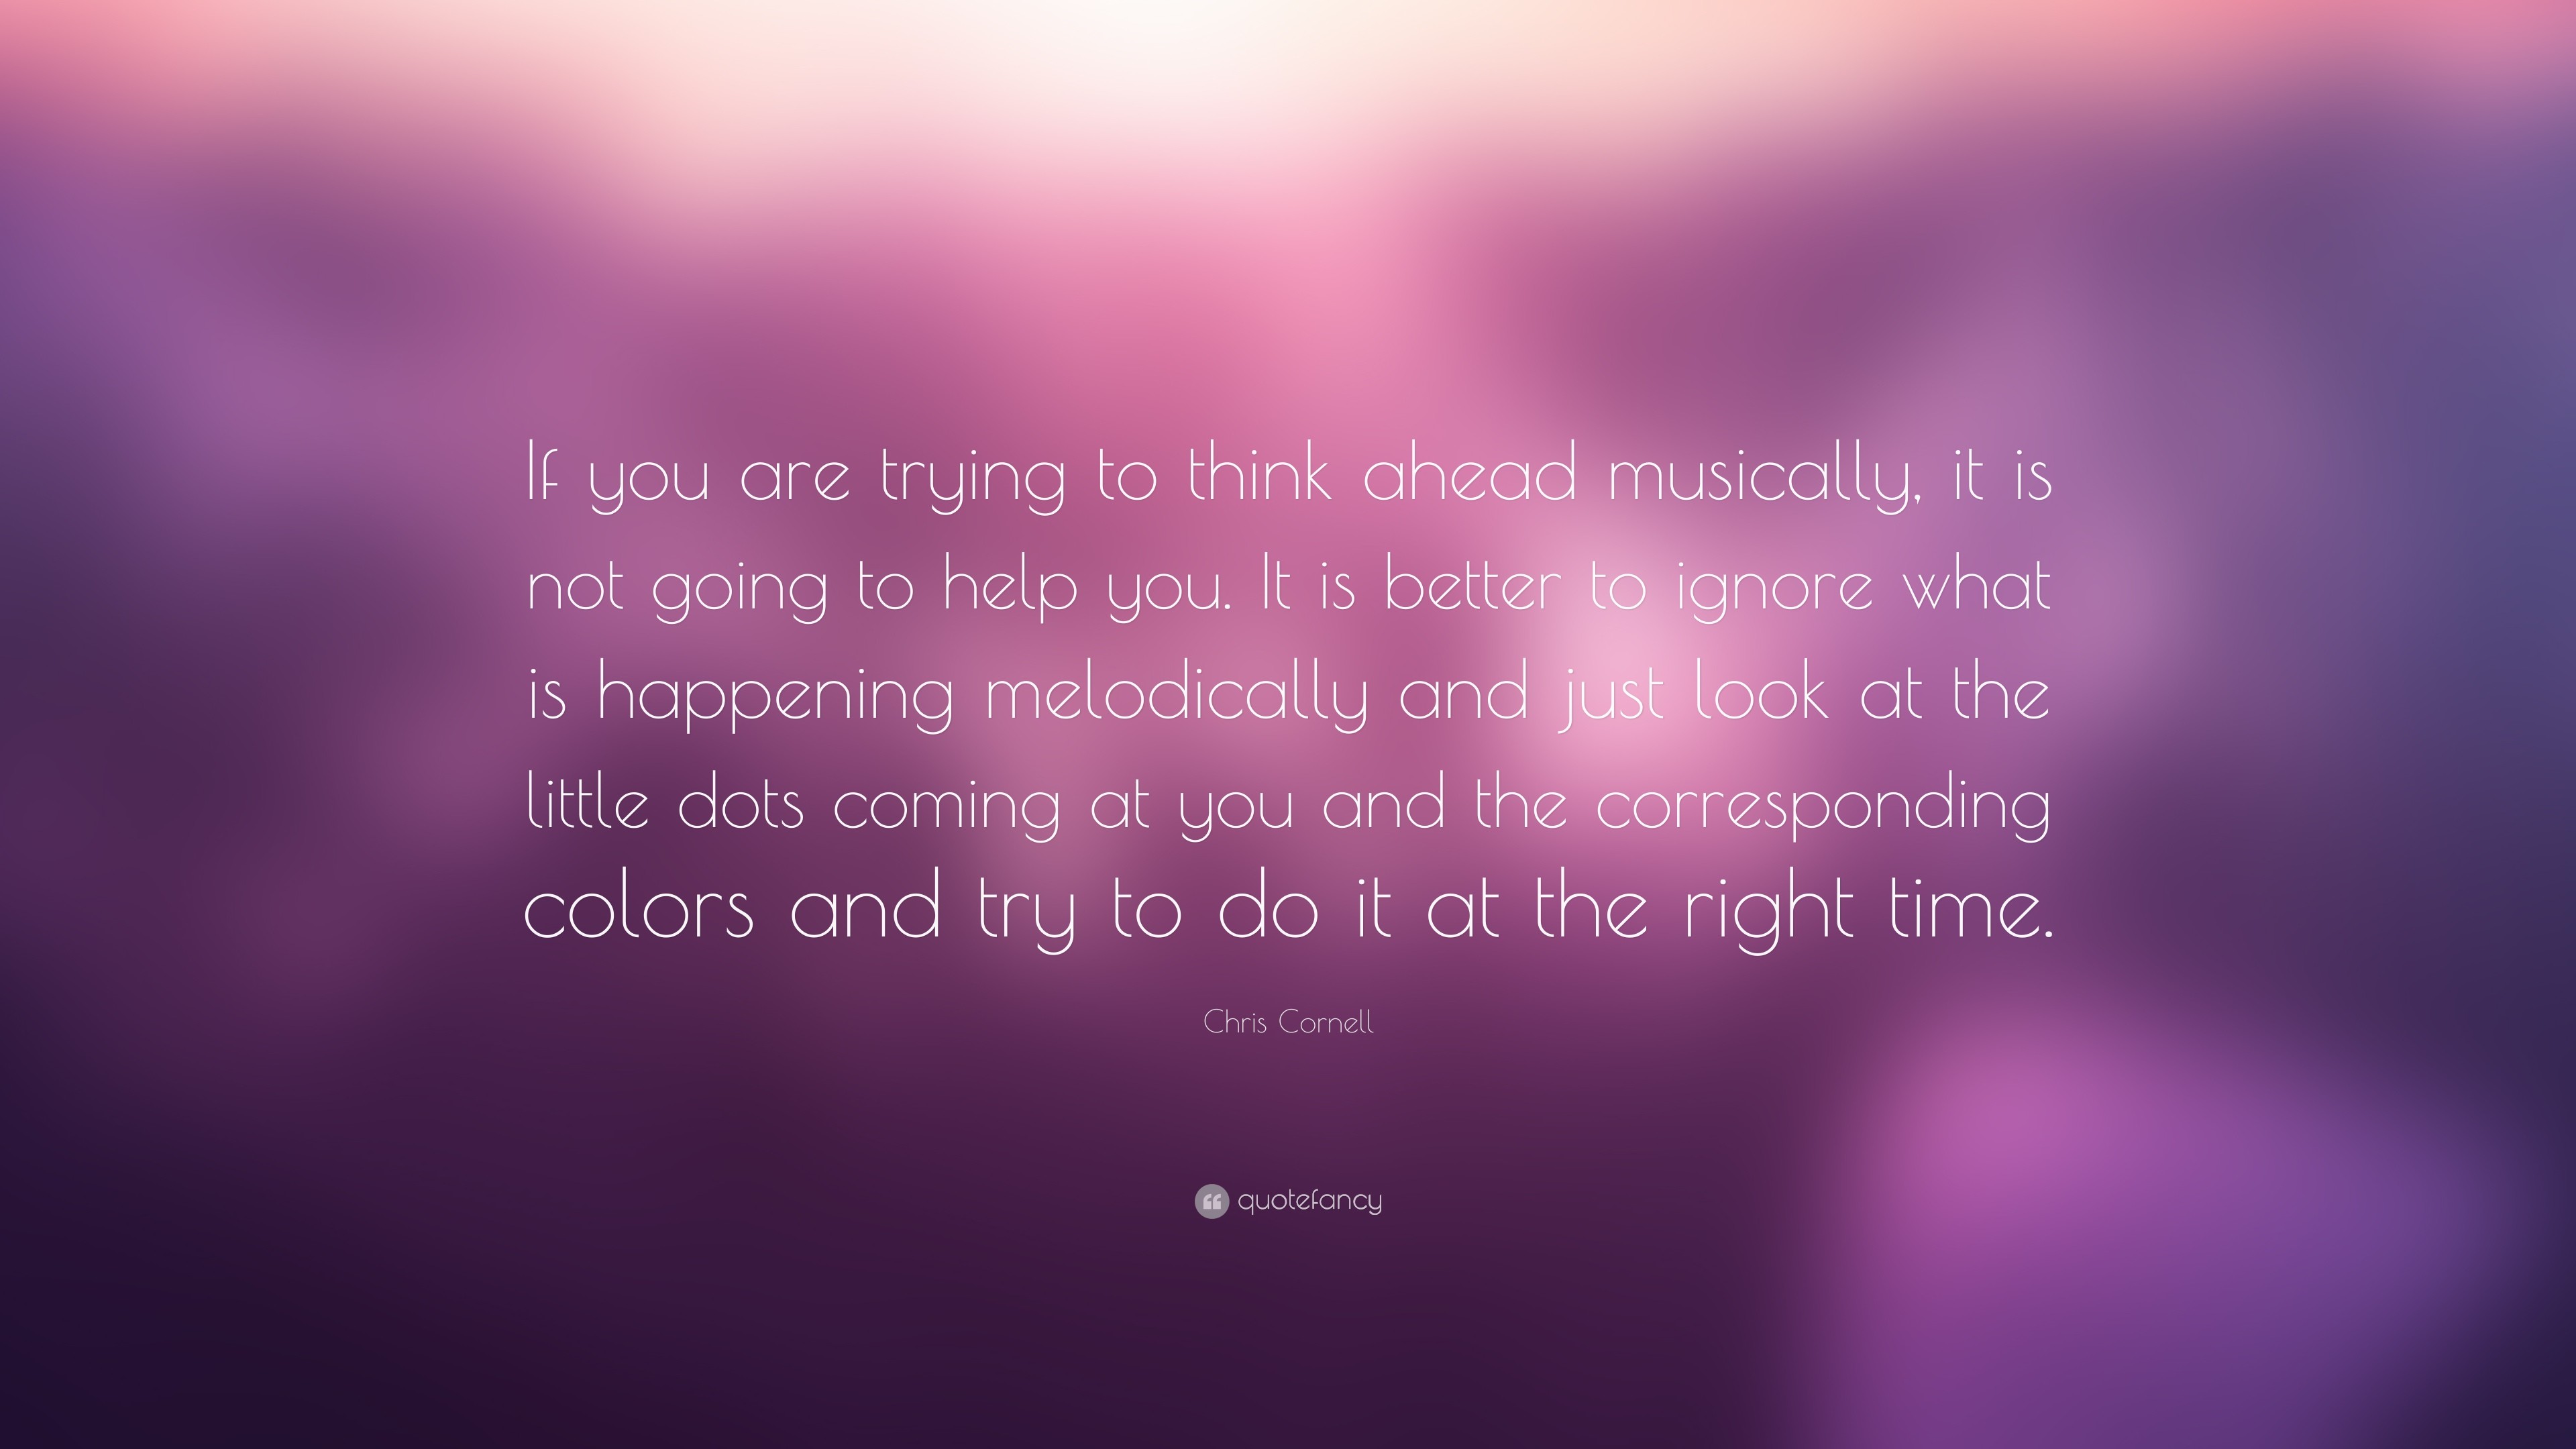 3840x2160 Chris Cornell Quote: “If you are trying to think ahead musically, it is